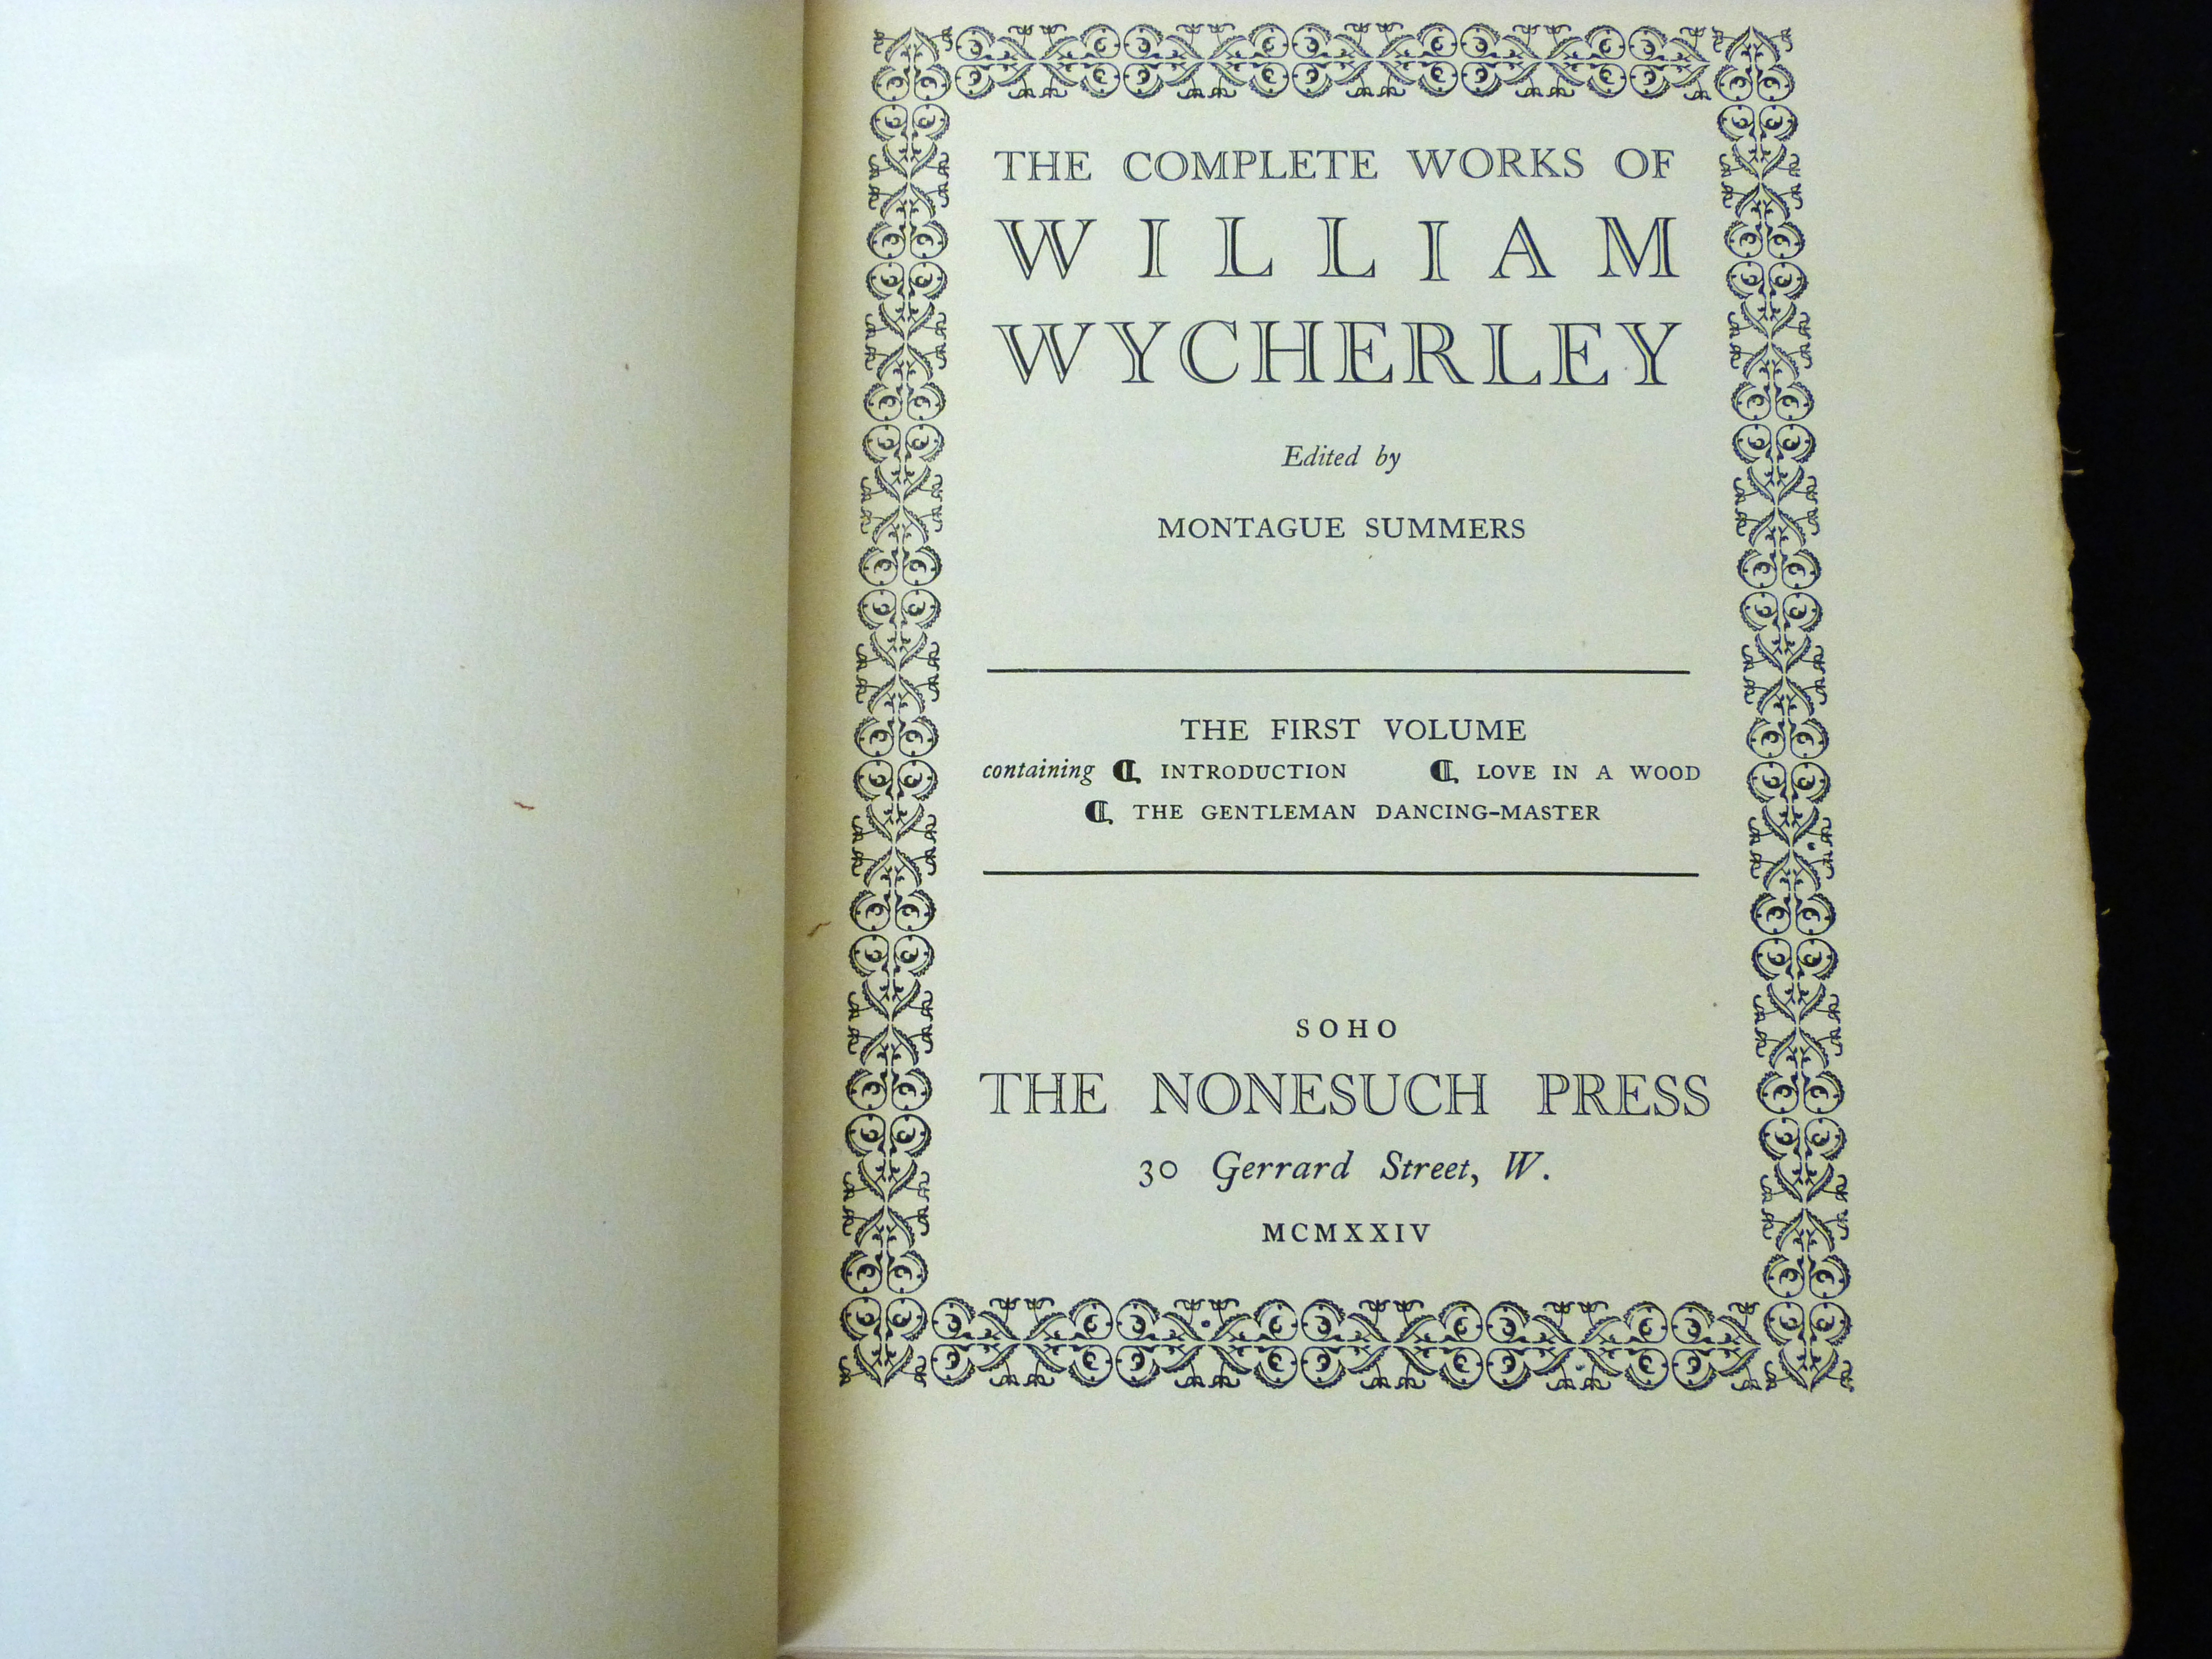 WILLIAM WICHERLEY: THE COMPLETE WORKS, ed Montague Summers, London, The Nonesuch Press, 1924, (950), - Image 3 of 3